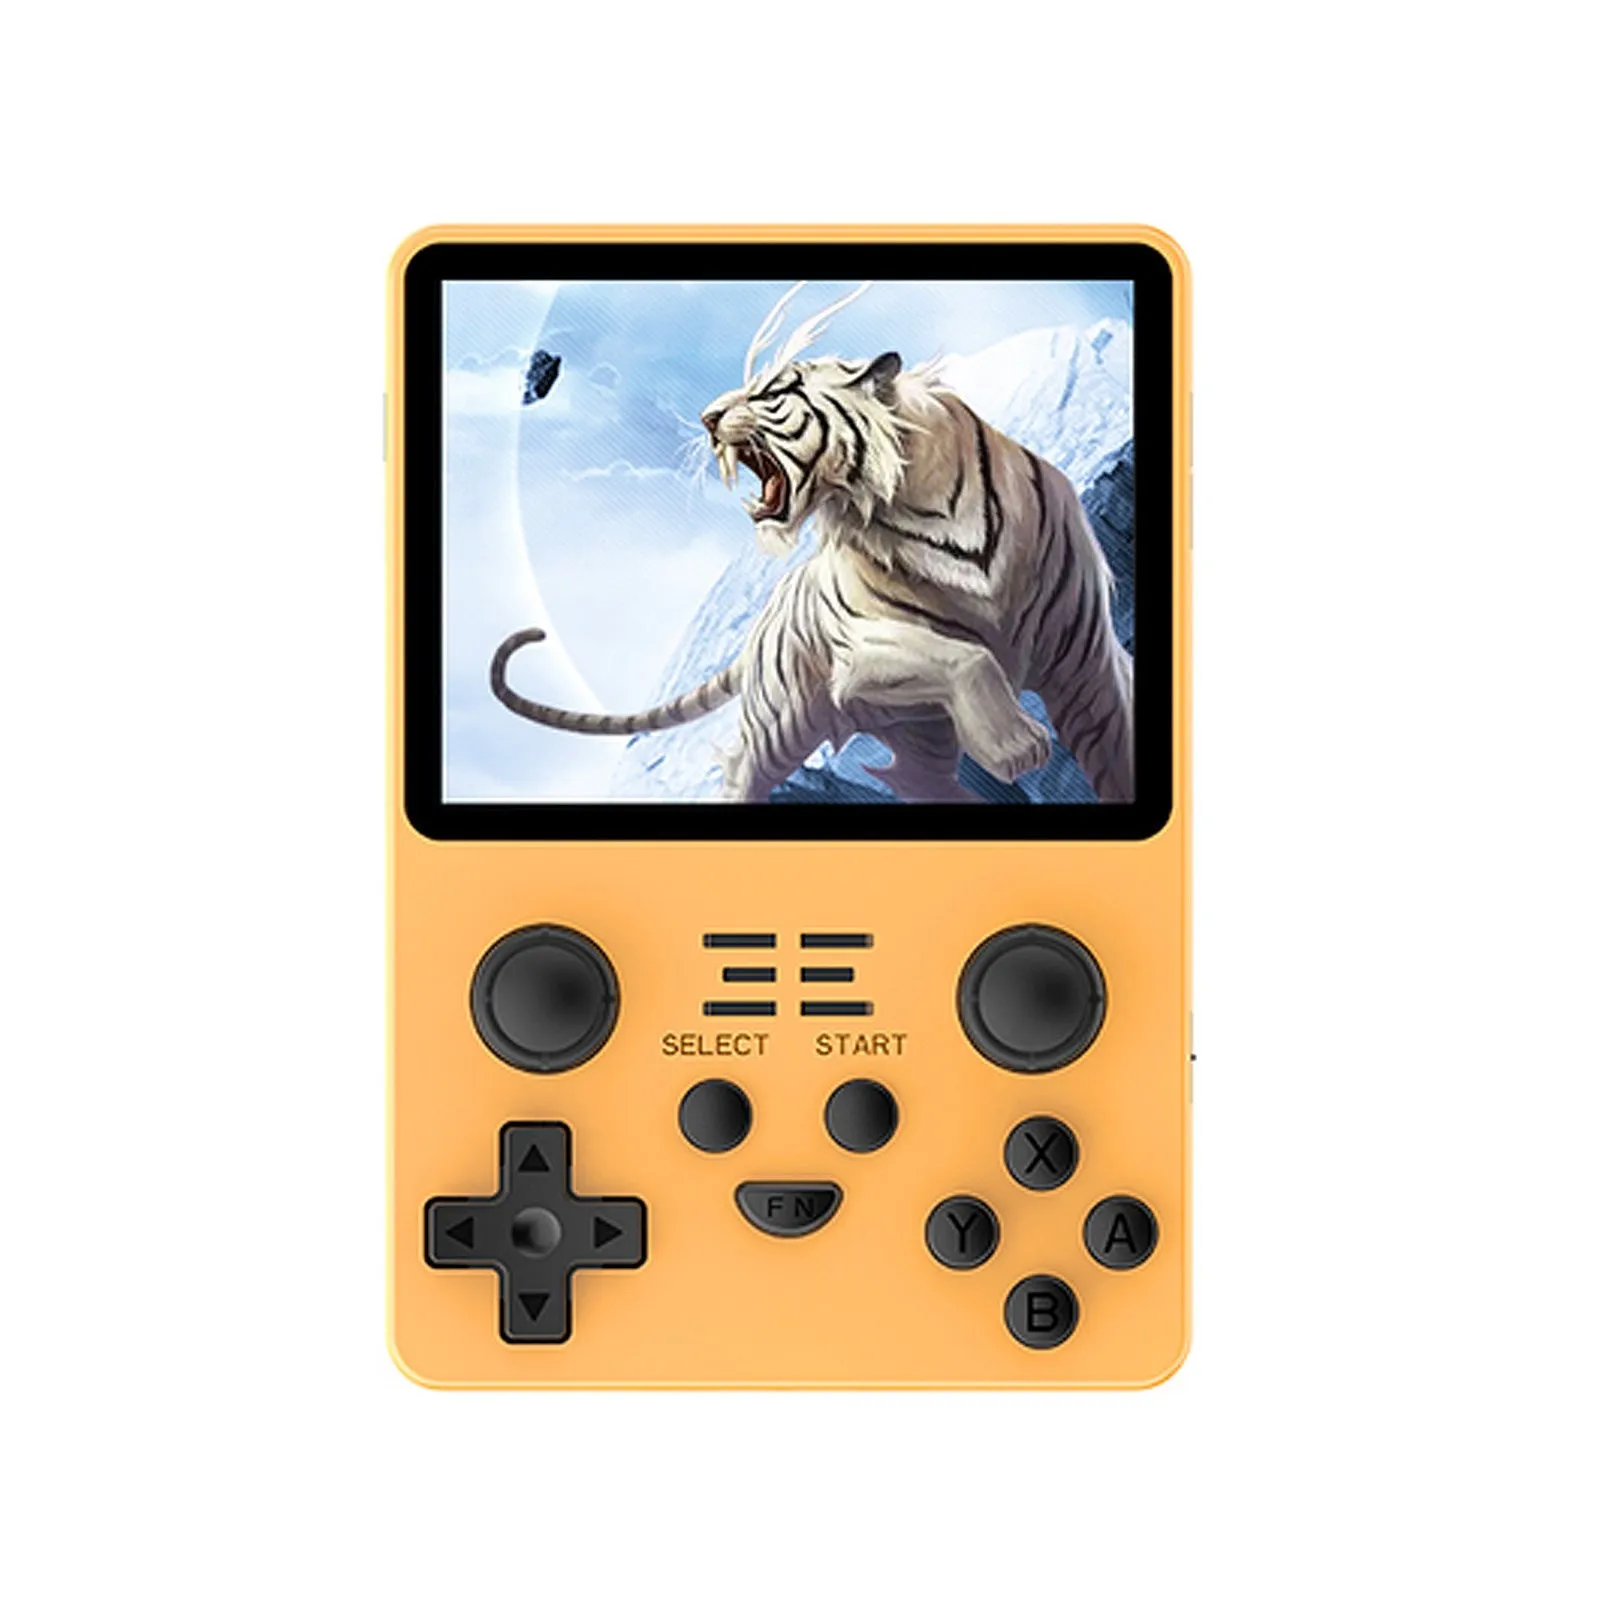 2023 New Rgb20S Retro Game Console Open Source System 3.5-Inch IPS Screen Handheld Video Game Console Free shipping Sale enlarge